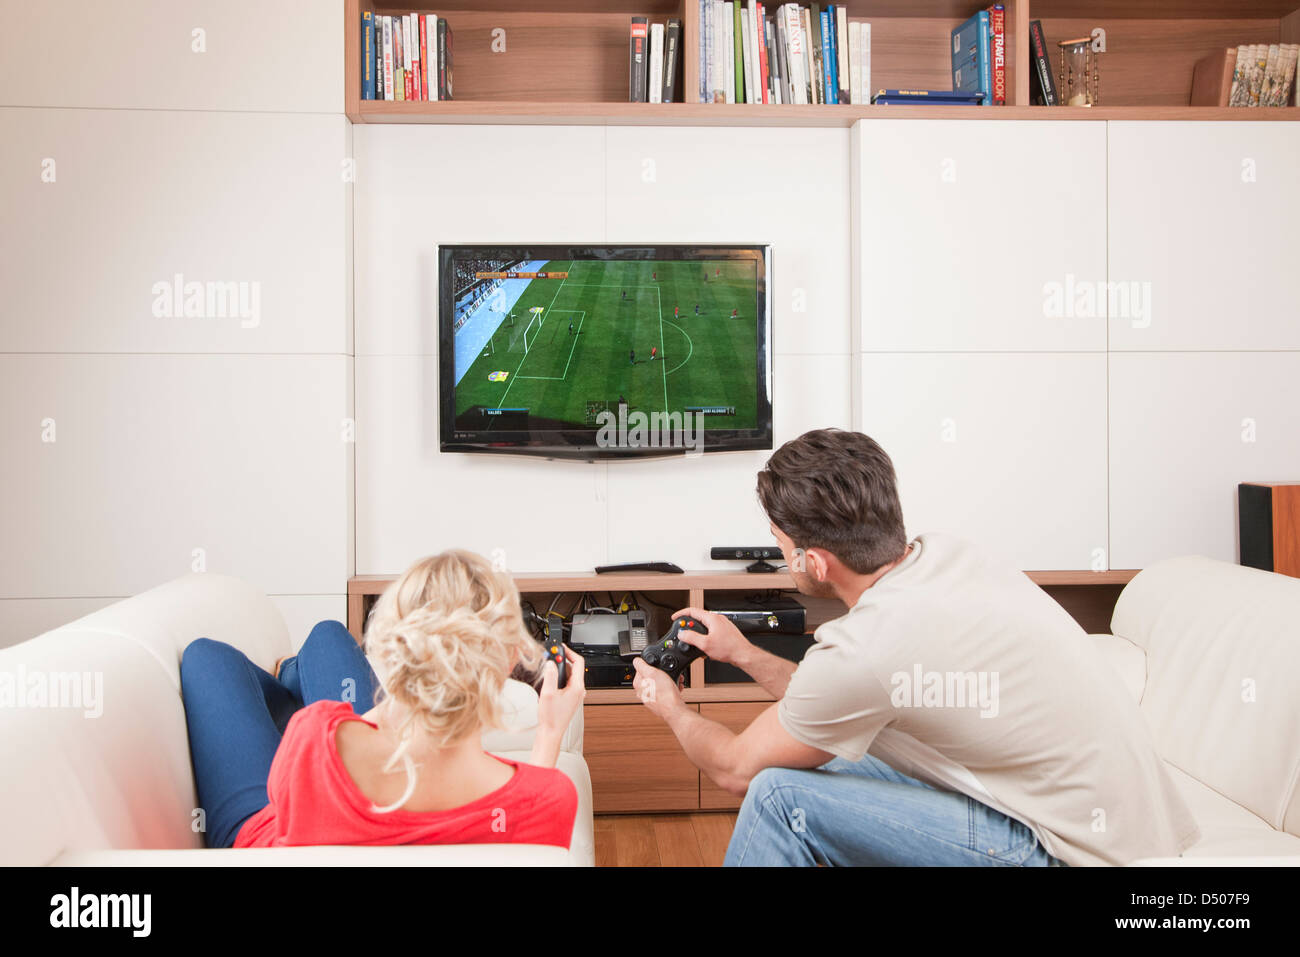 Couple playing console game Stock Photo